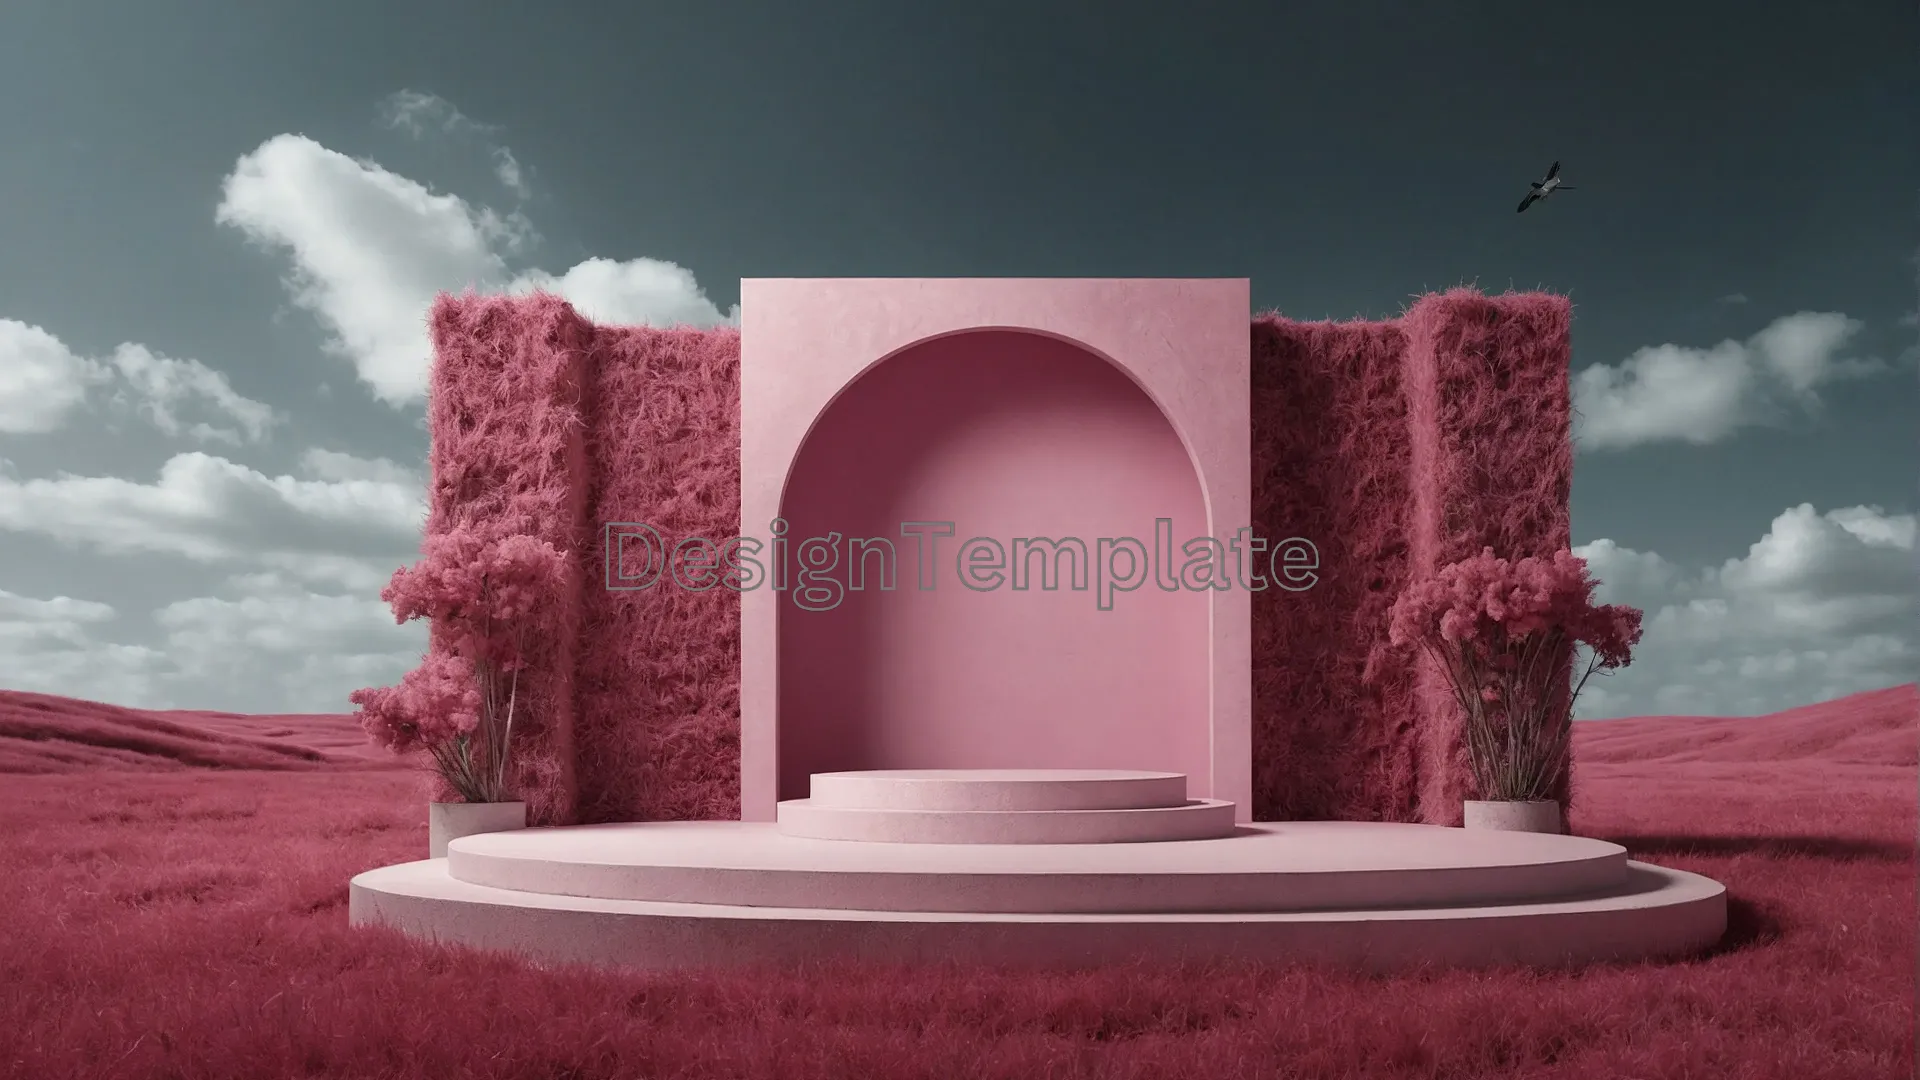 Red Grass Landscape with Pink Podium Background Photo image